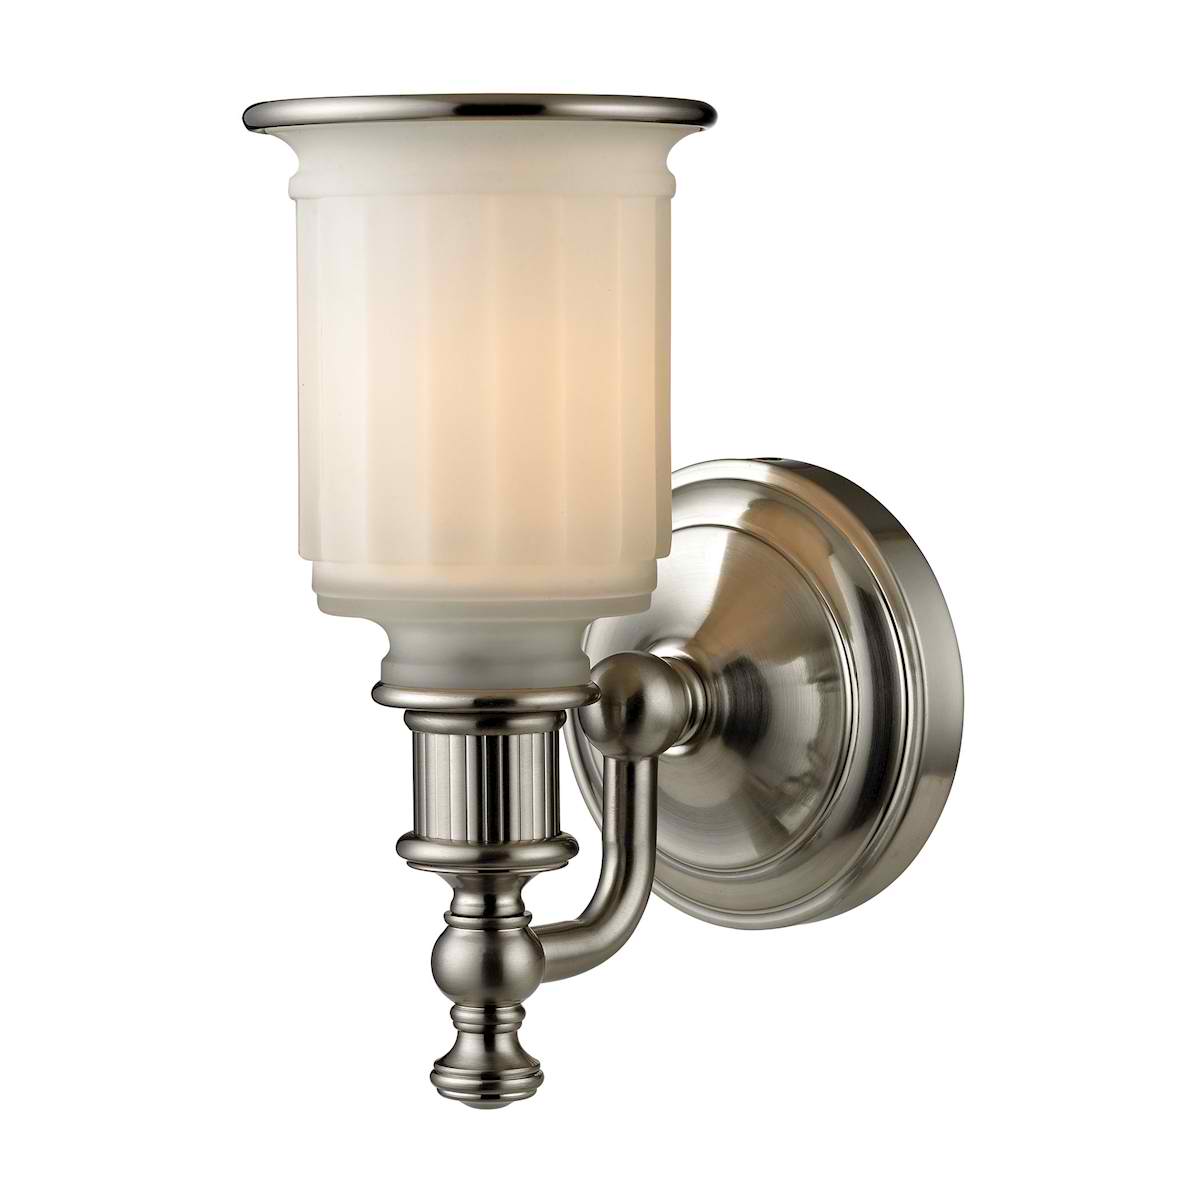 Acadia Collection 1 Light Bath in Brushed Nickel